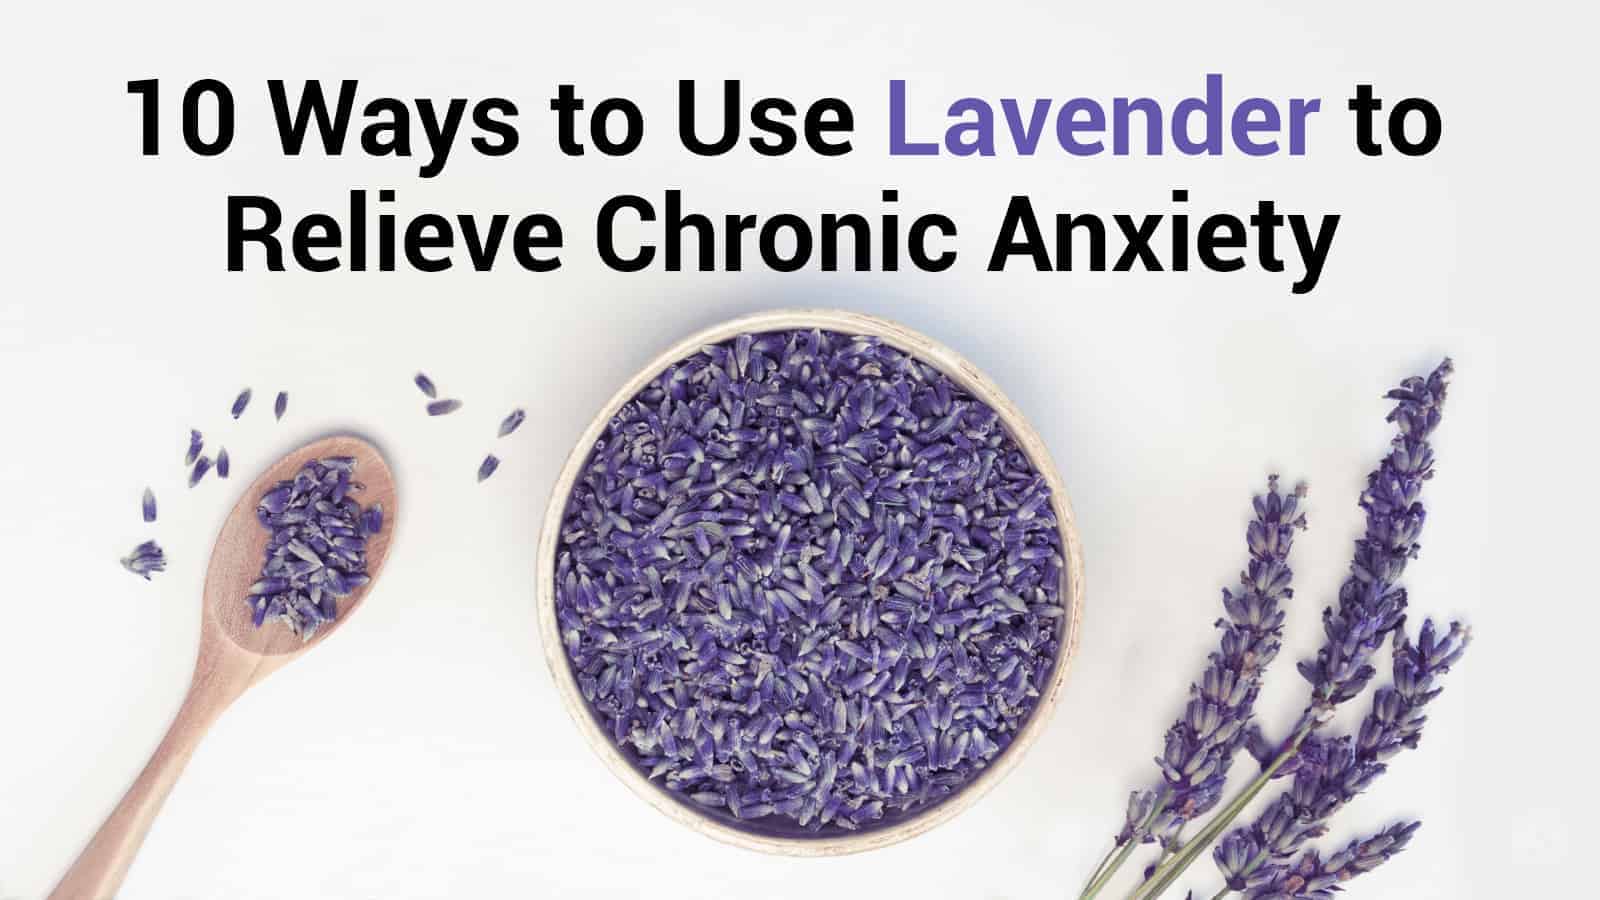 10 Ways to Use Lavender to Relieve Chronic Anxiety